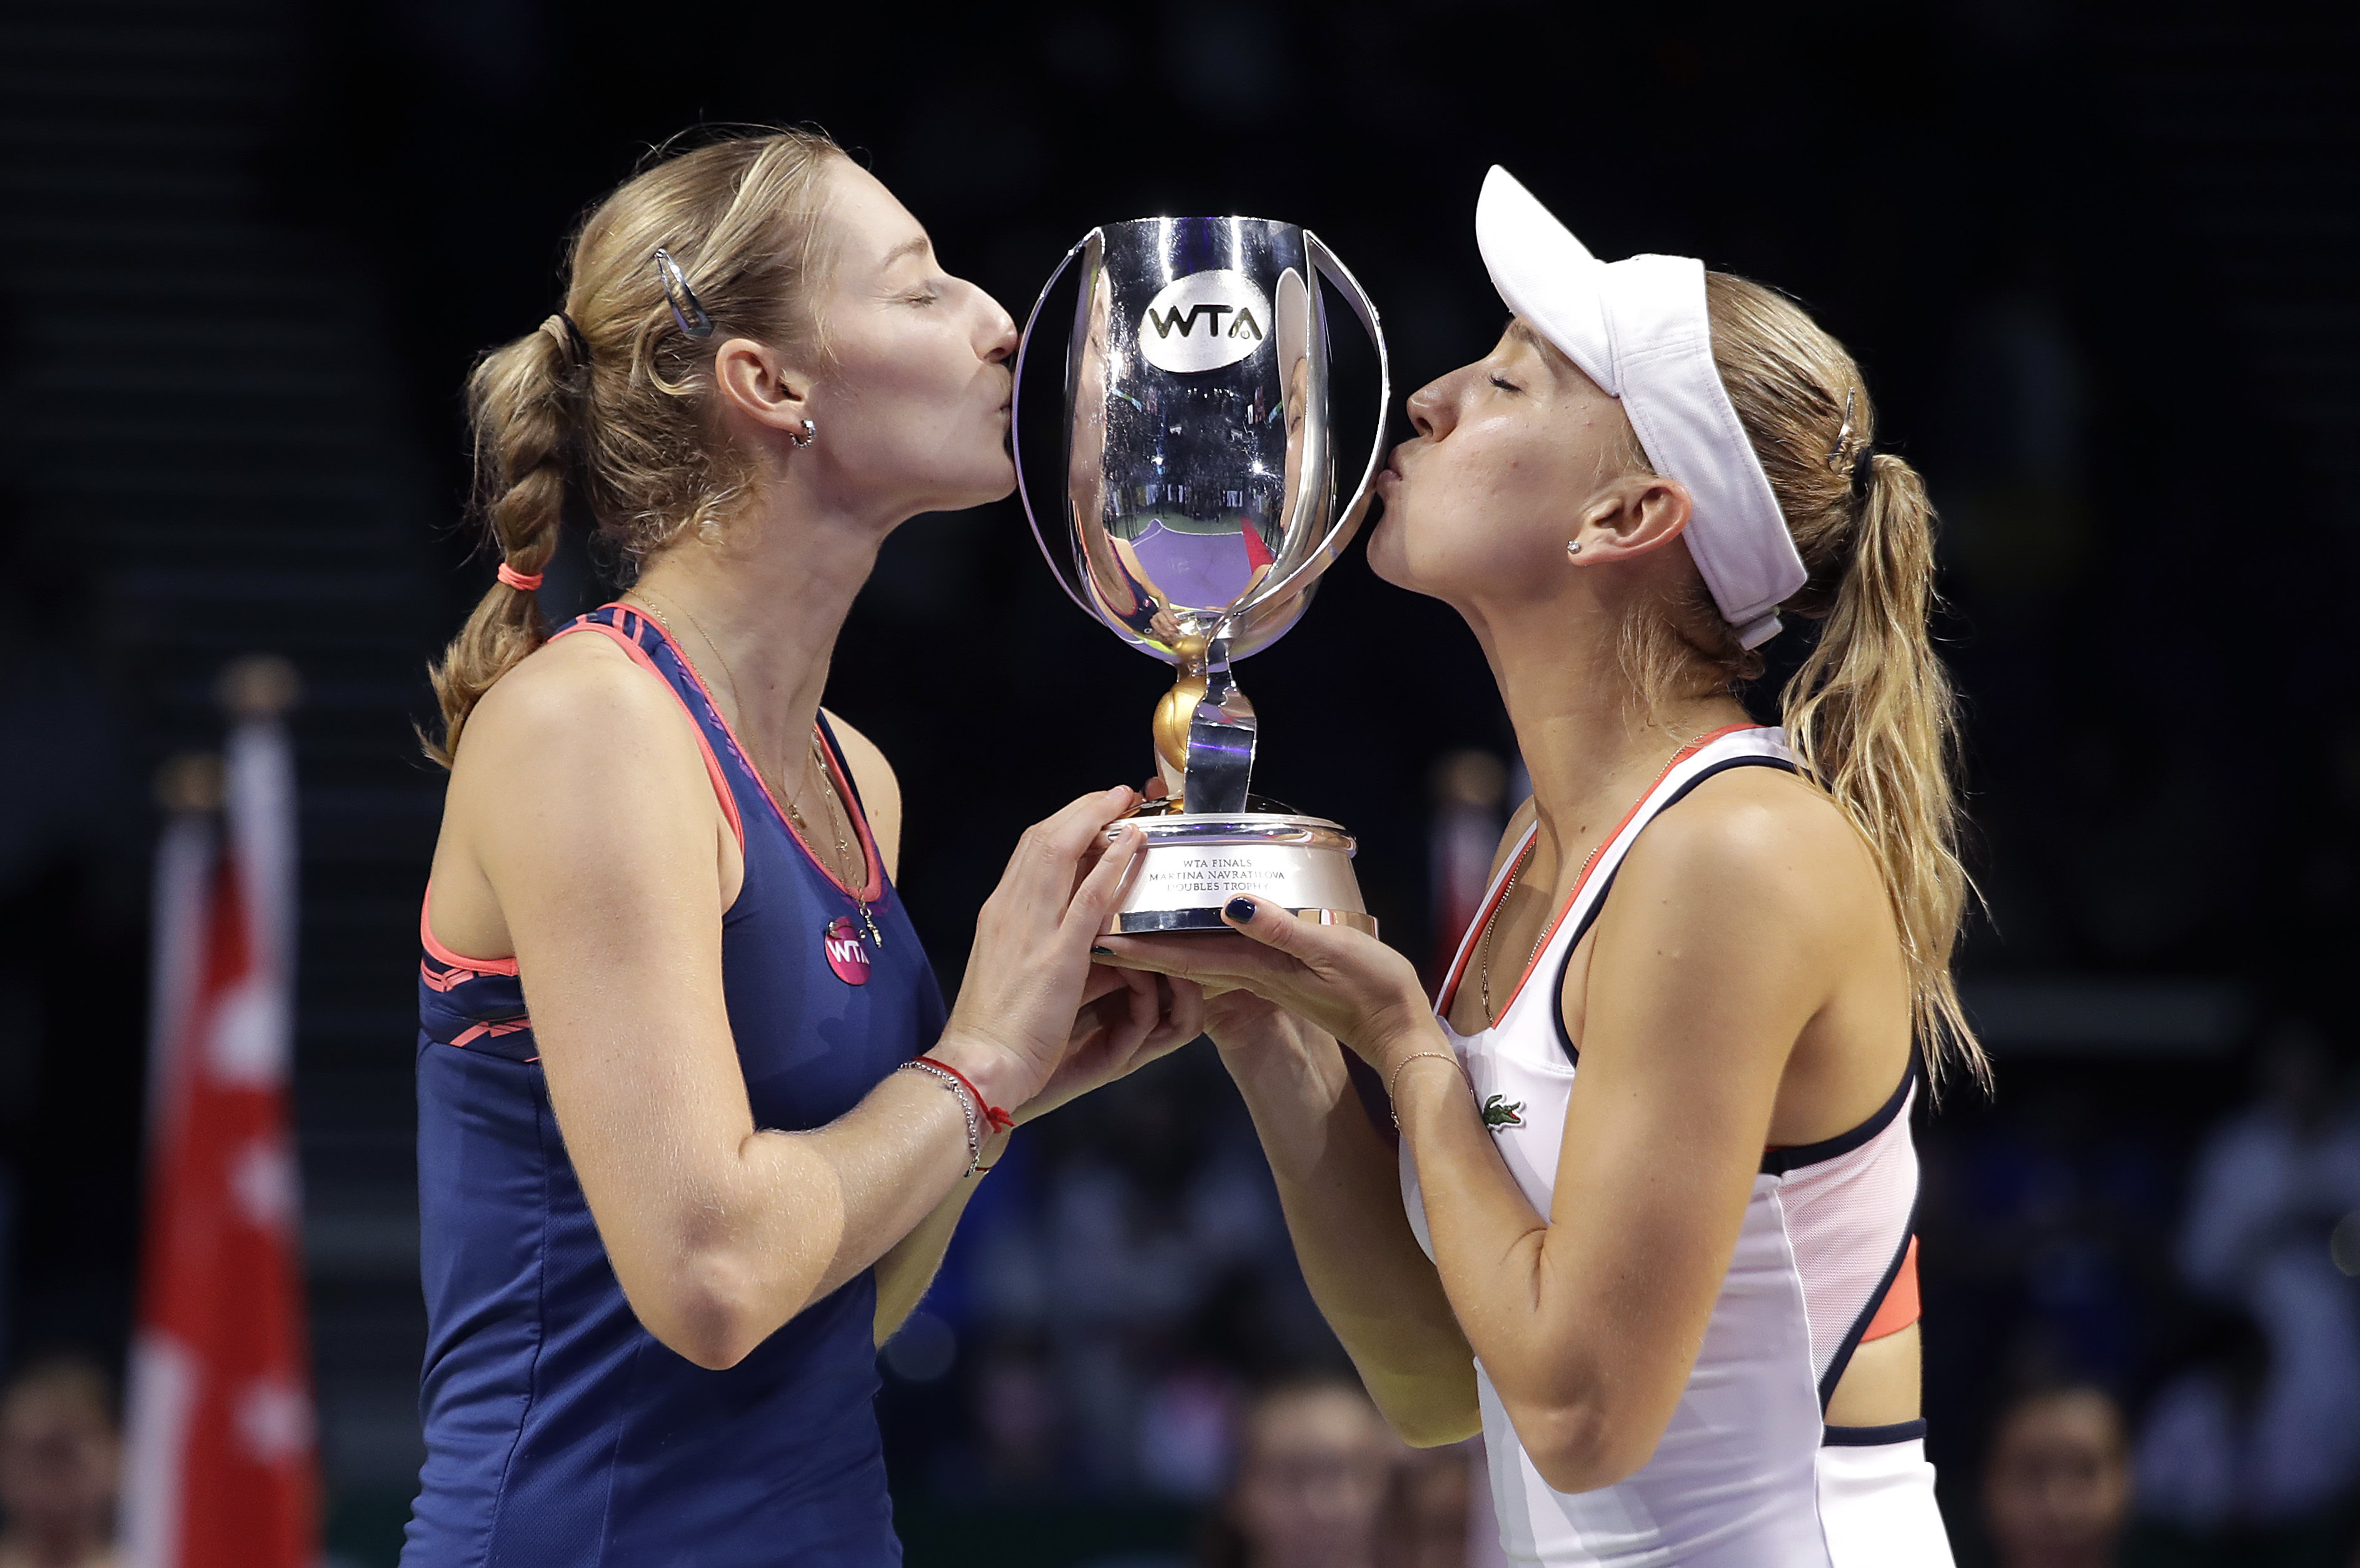 The best WTA doubles teams of the 21st century